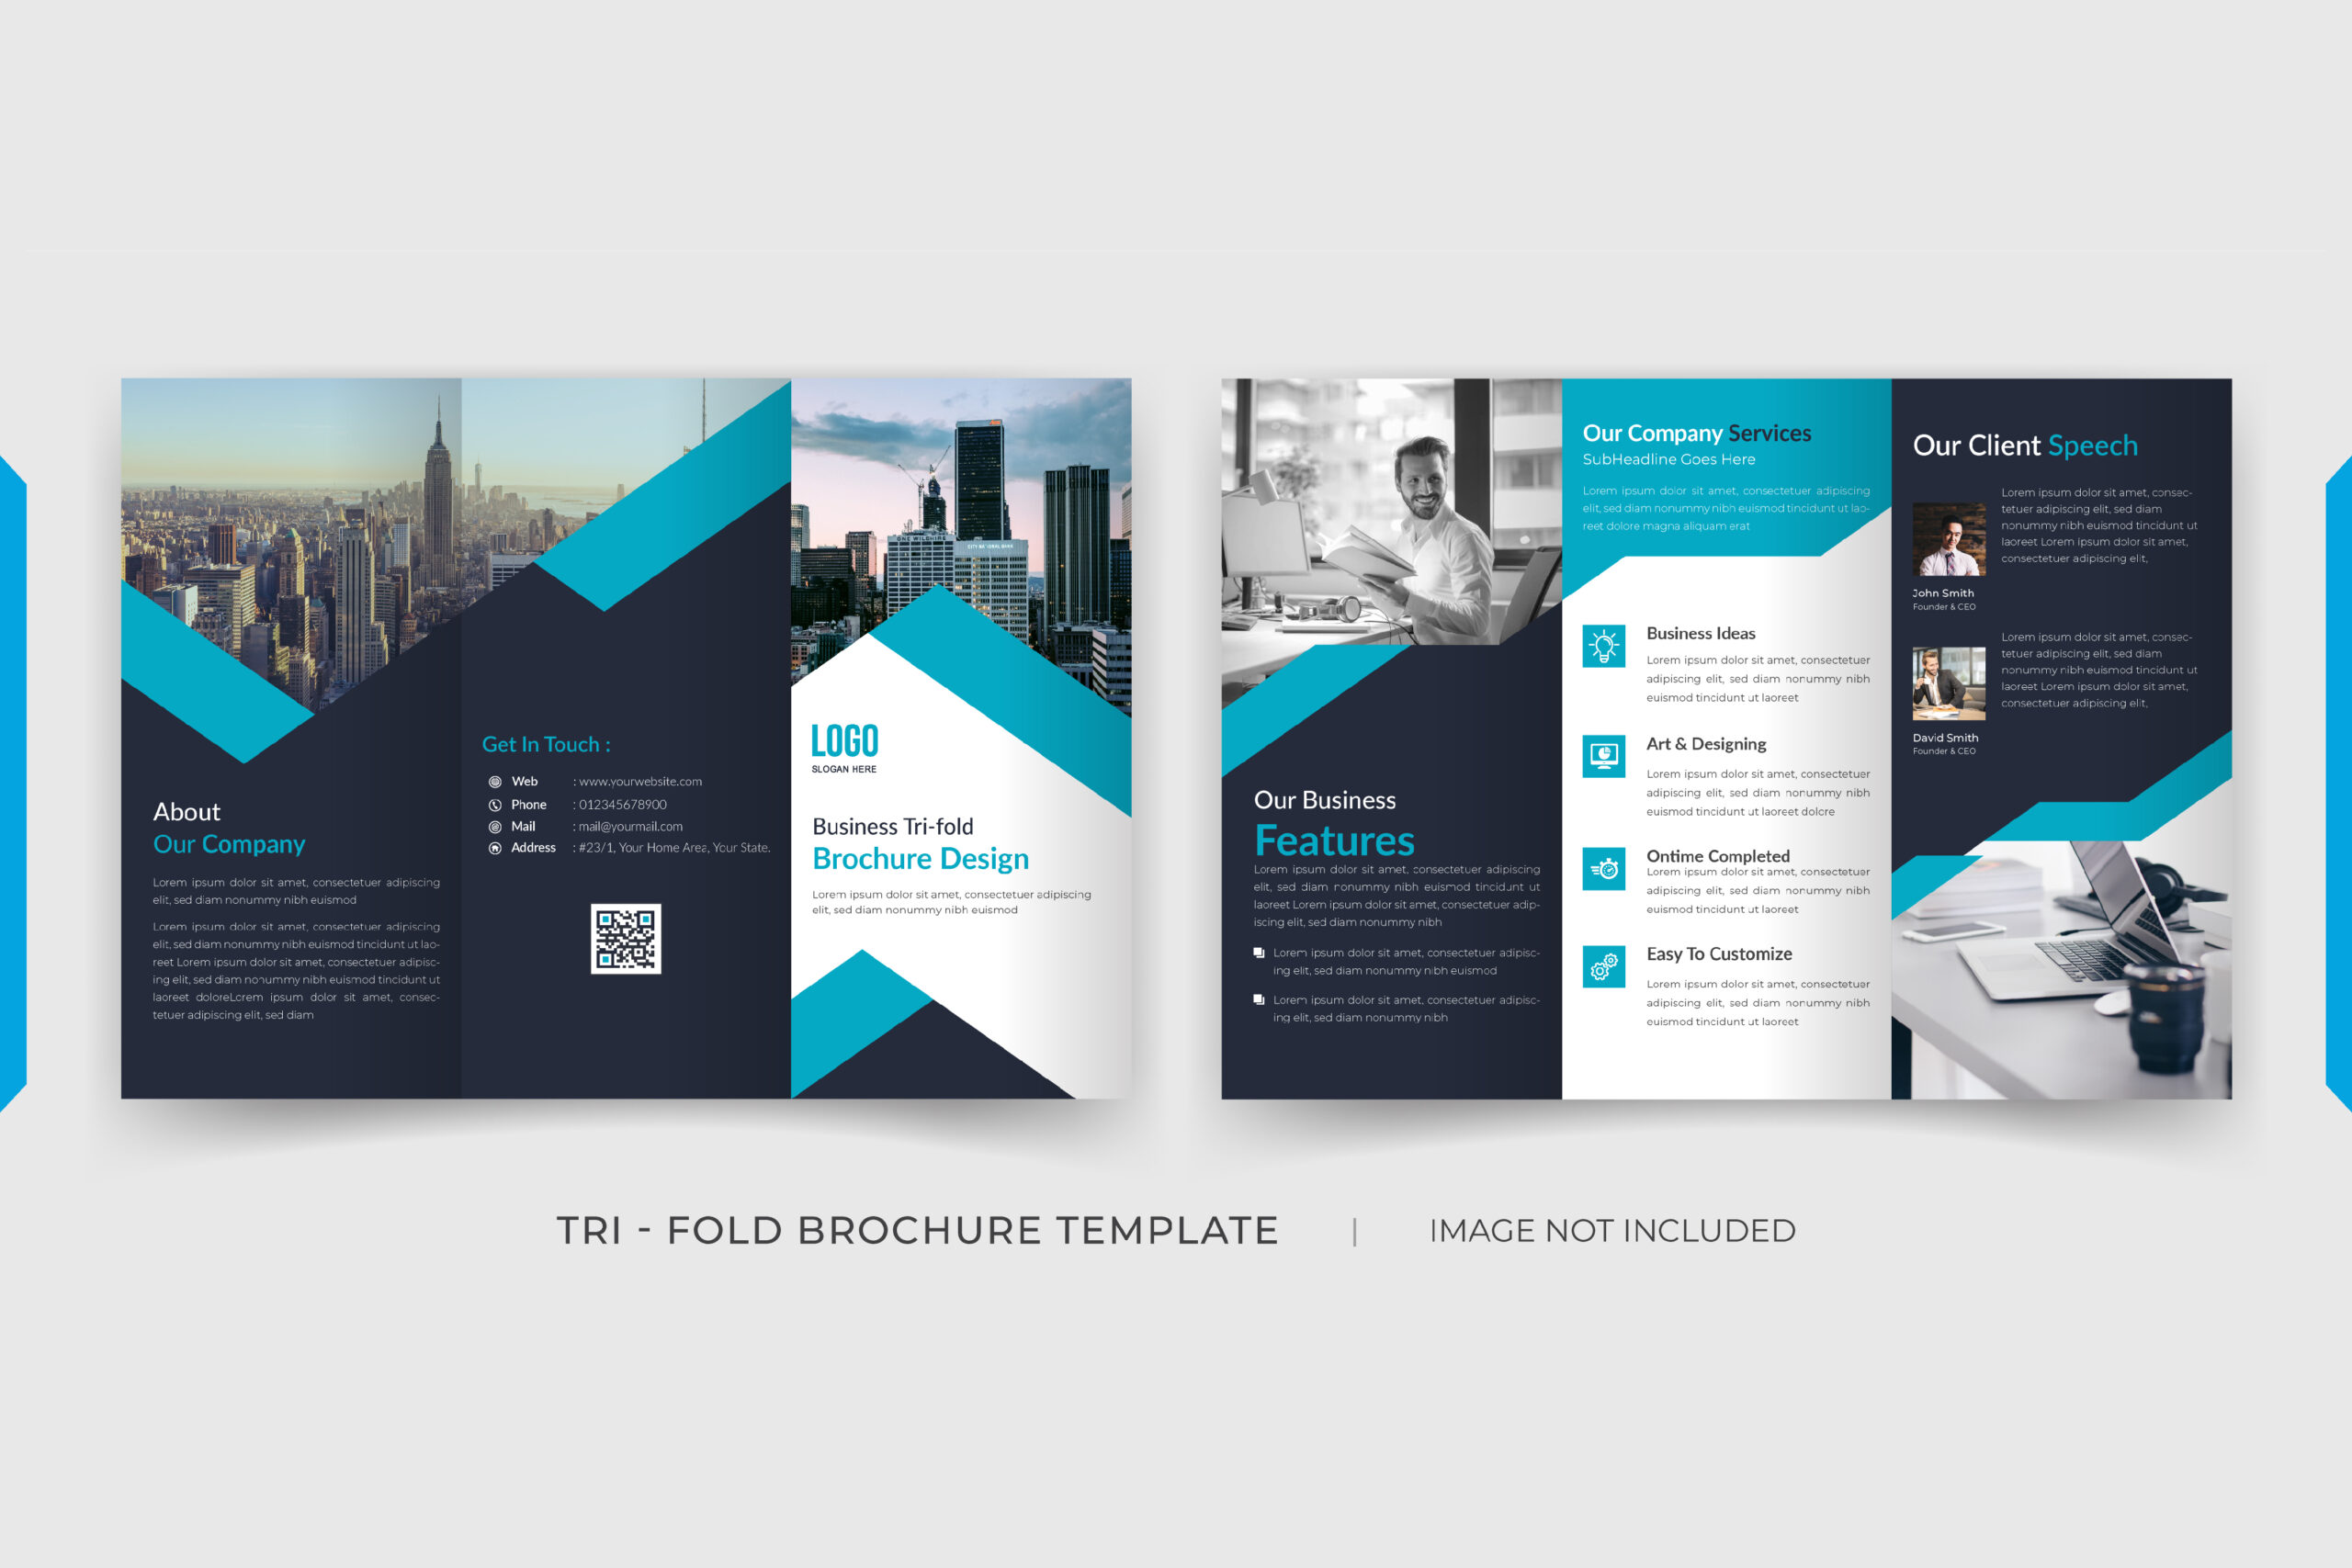 10 Pages Tri-fold Brochure Template Within 6 Panel Brochure Template